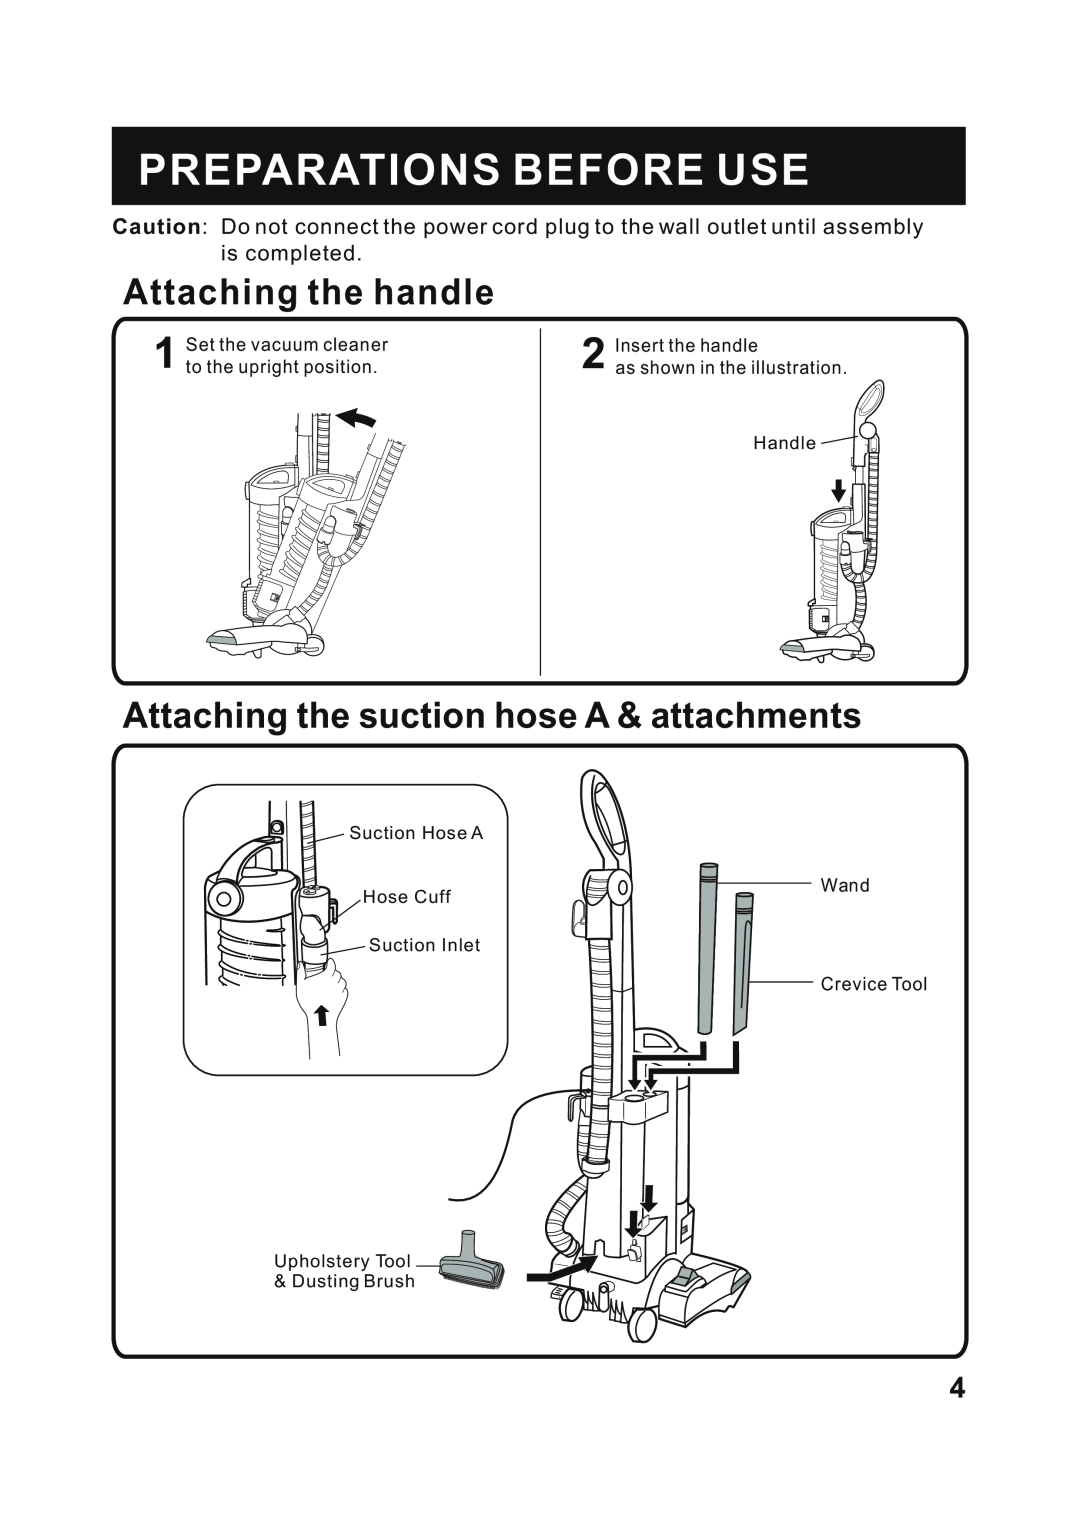 Fantom Vacuum FM741HR Preparations Before Use, Attaching the handle, Attaching the suction hose A & attachments 